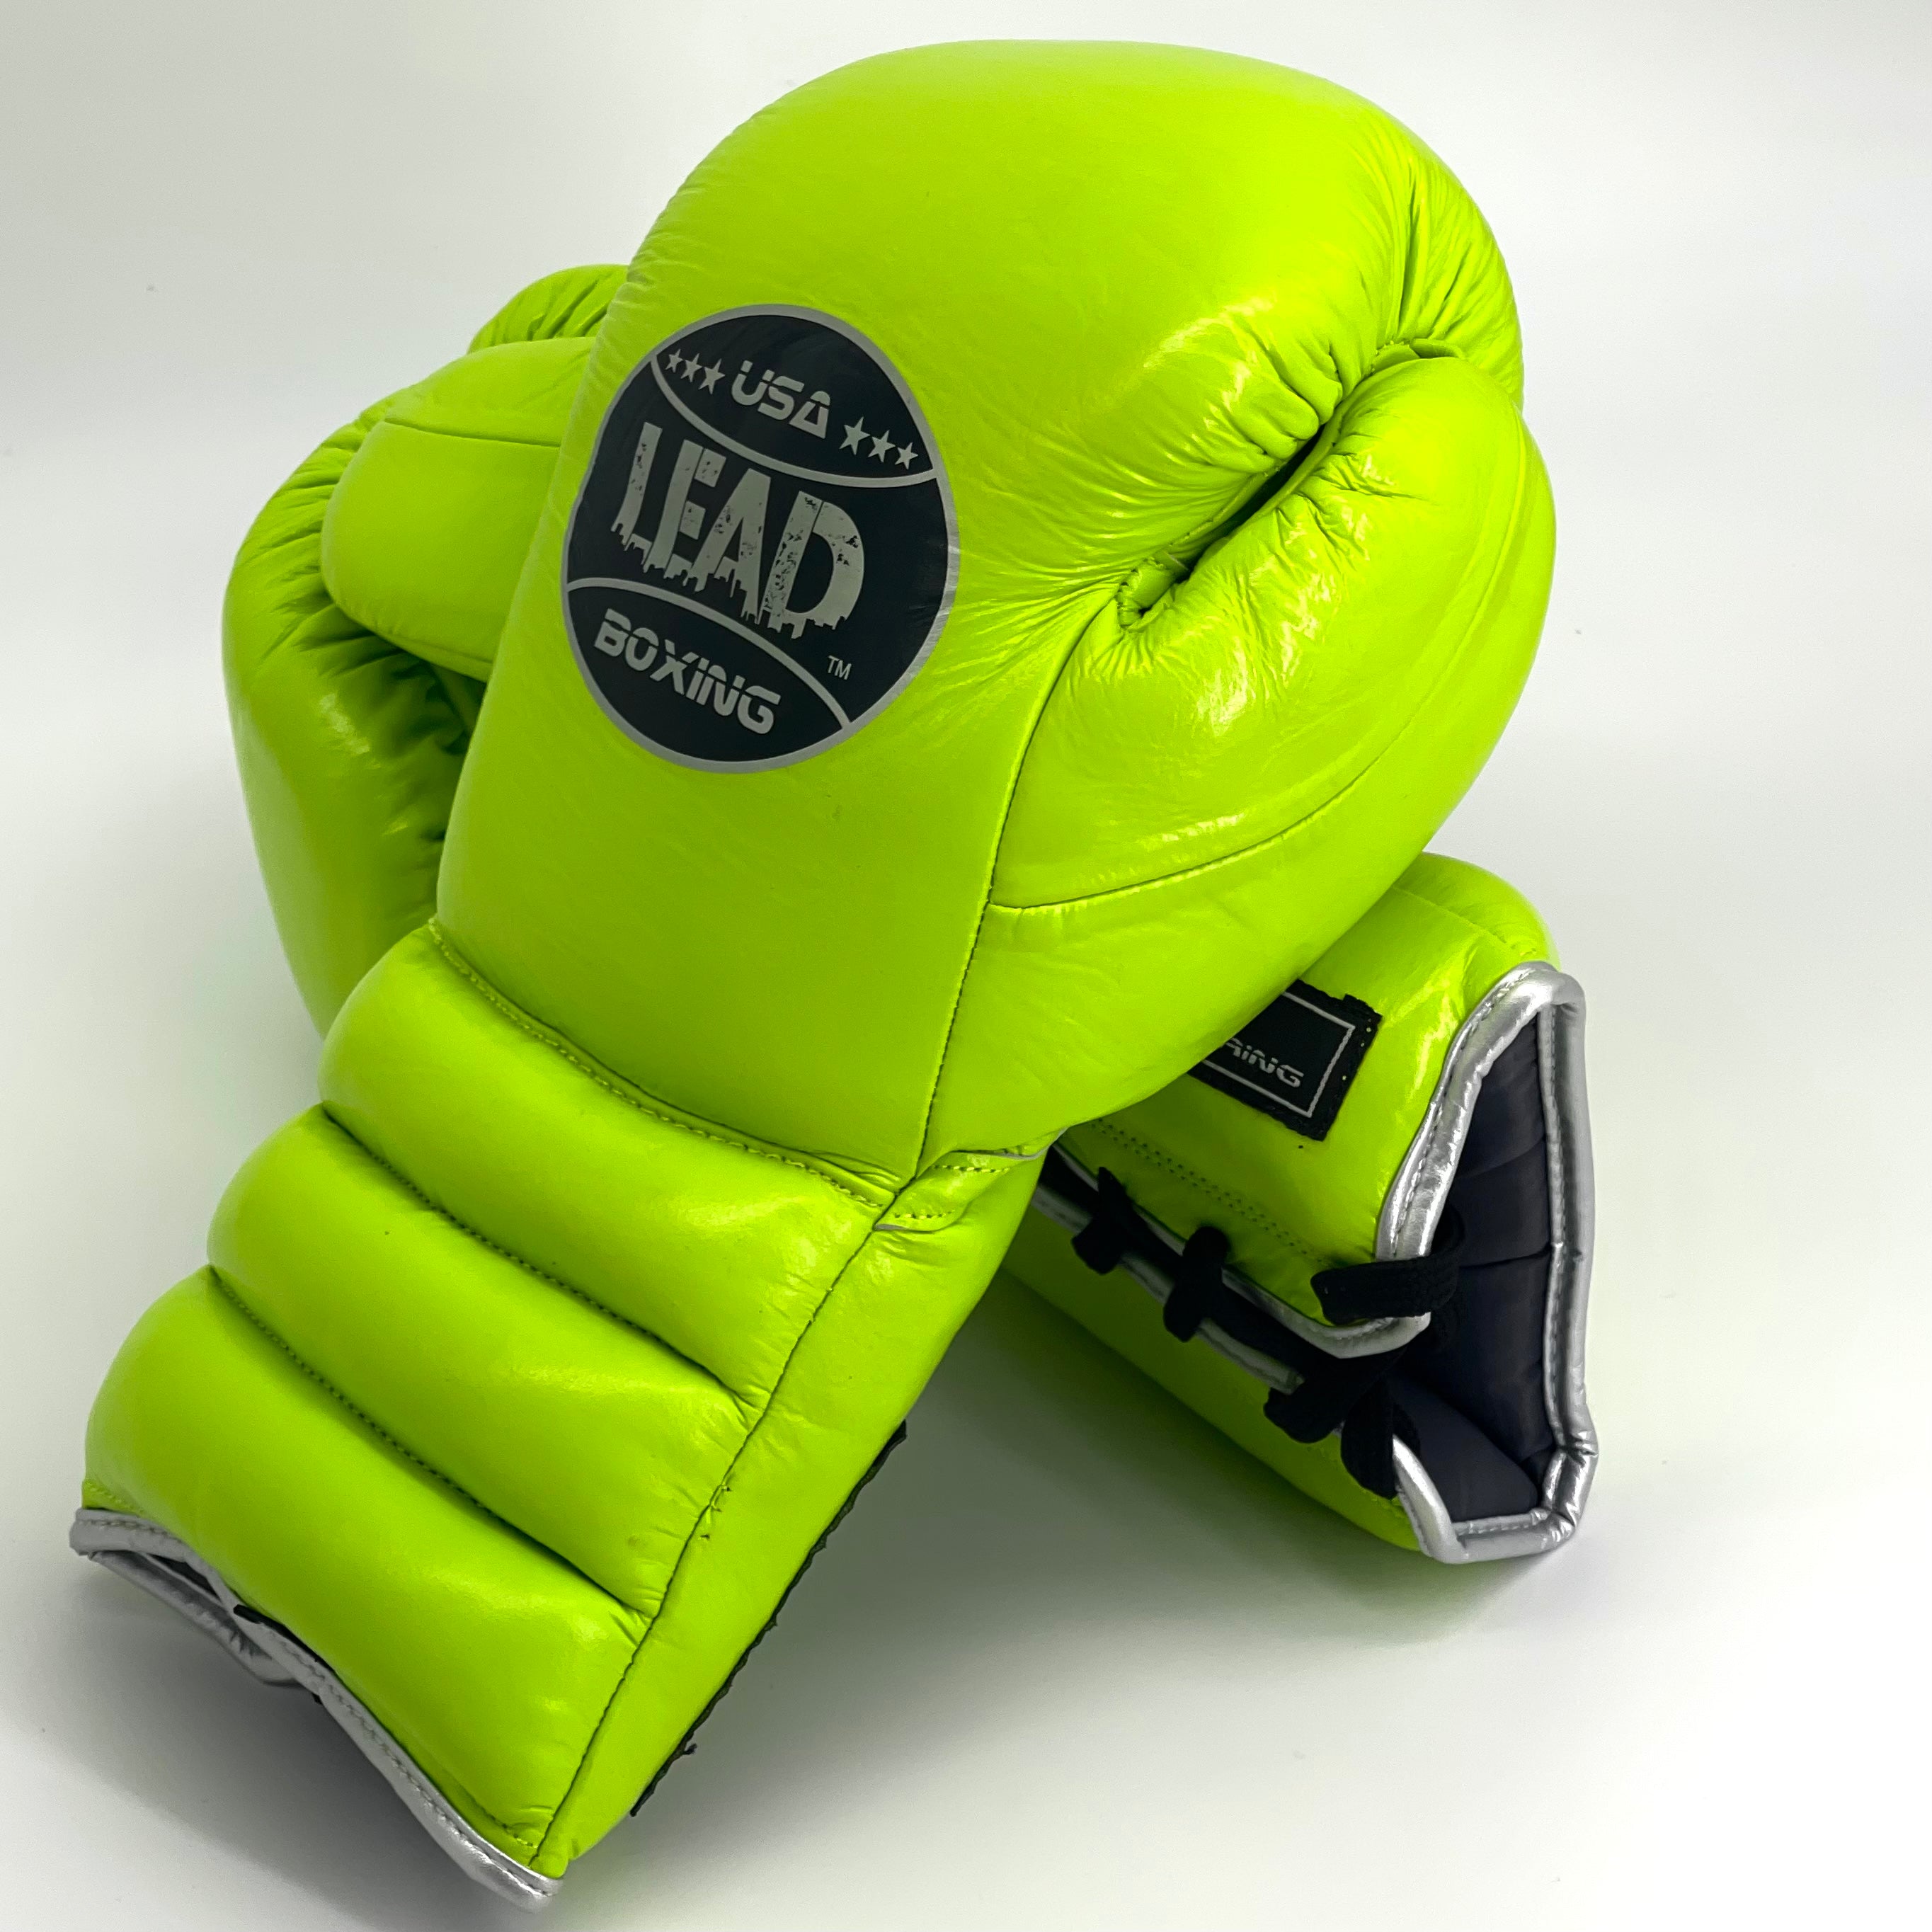 LEAD Sparring Gloves Laced  (Neon Green)